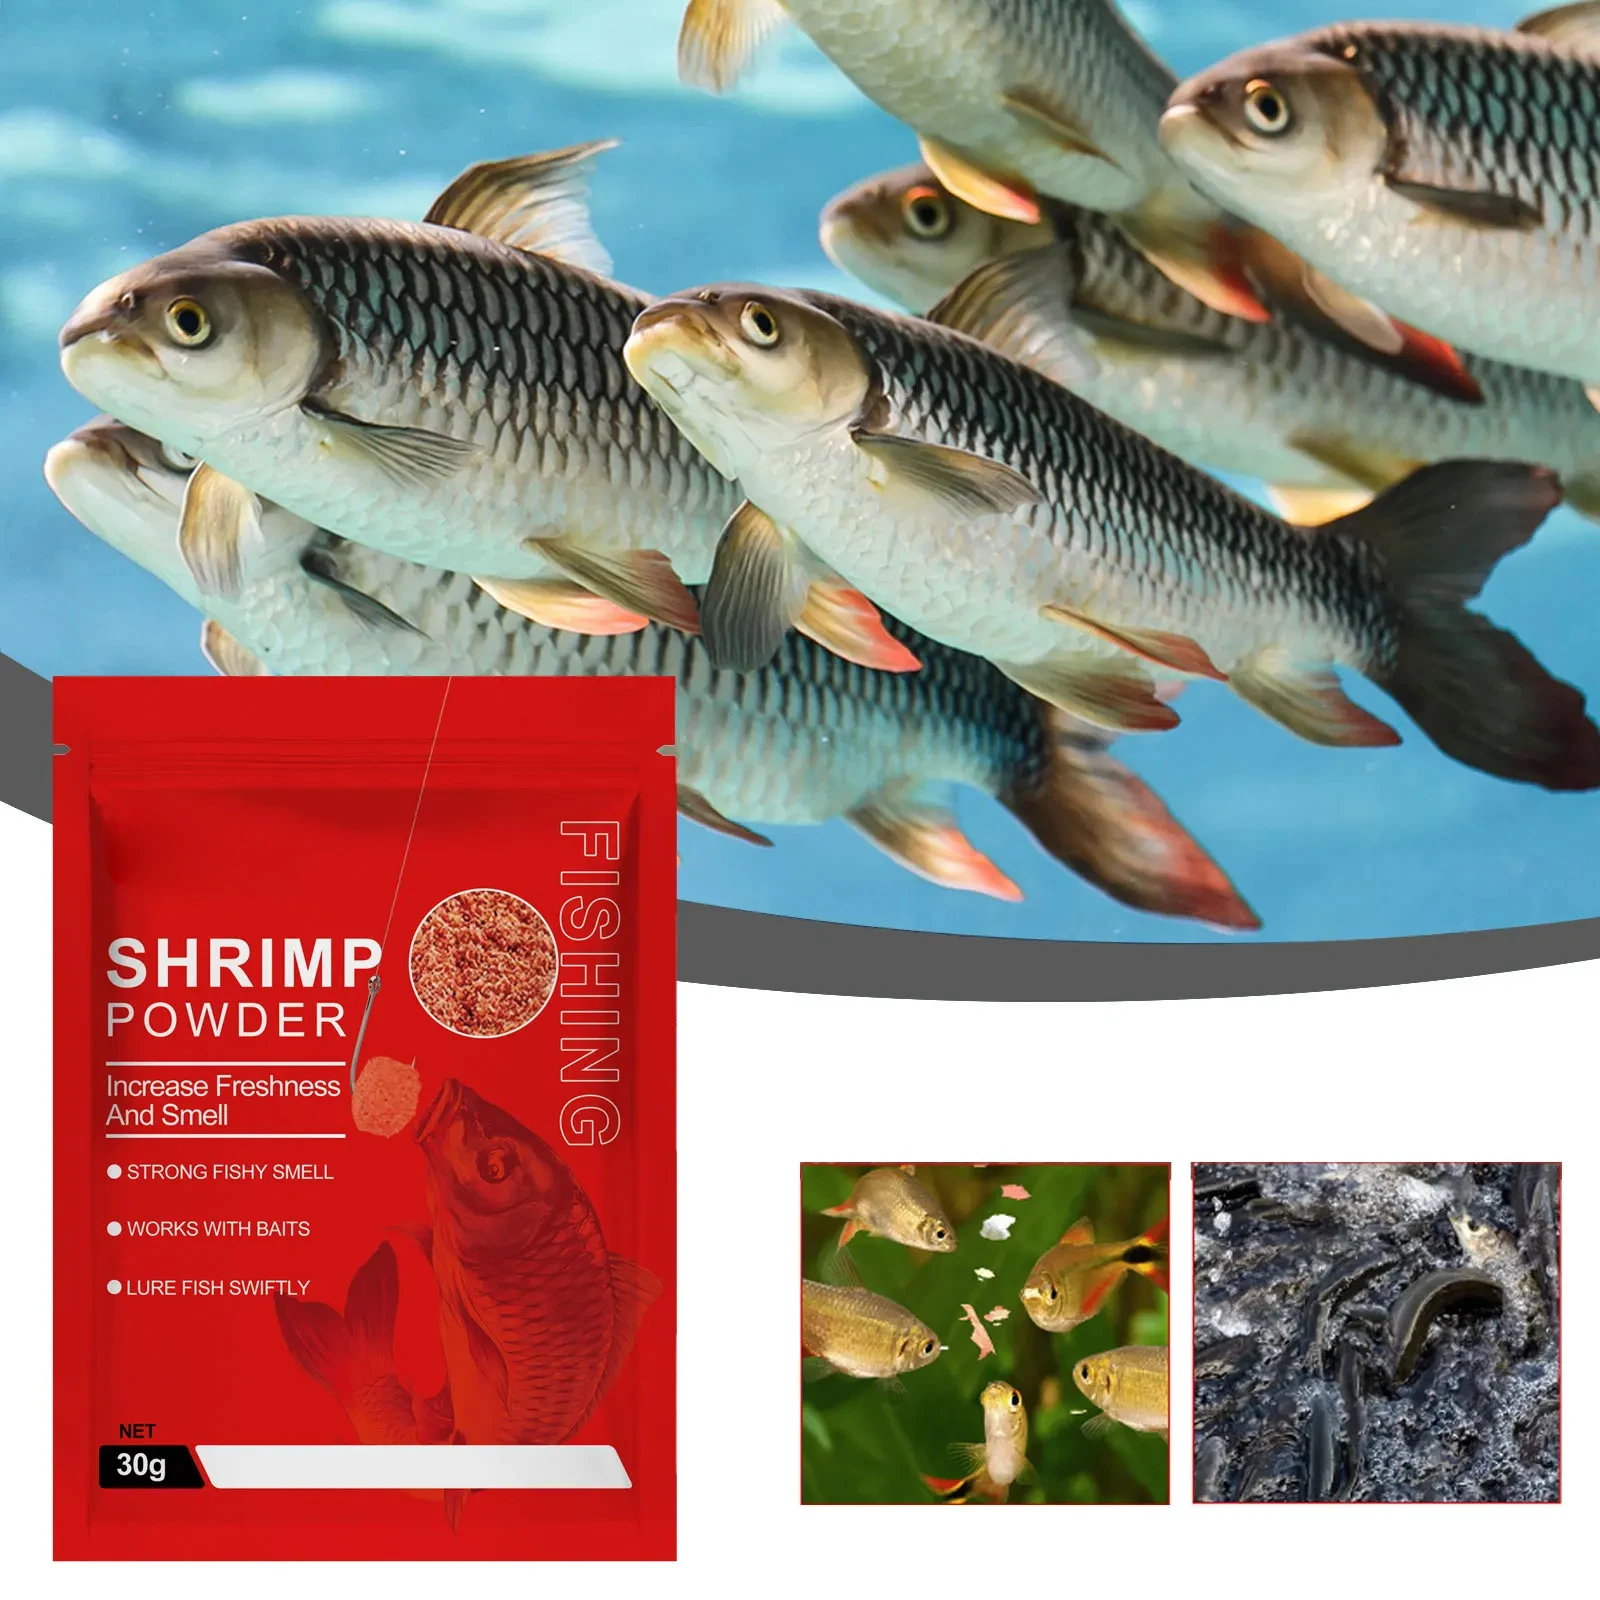 https://ae01.alicdn.com/kf/Ac0a43c4d6d96434d955826d35888e53dD/Fish-Attractant-Powder-Shrimp-Lure-Concentrated-Fishbait-Perch-Catfish-Carp-Trout-Blood-Worm-Scent-Freshwater-Fish.jpg